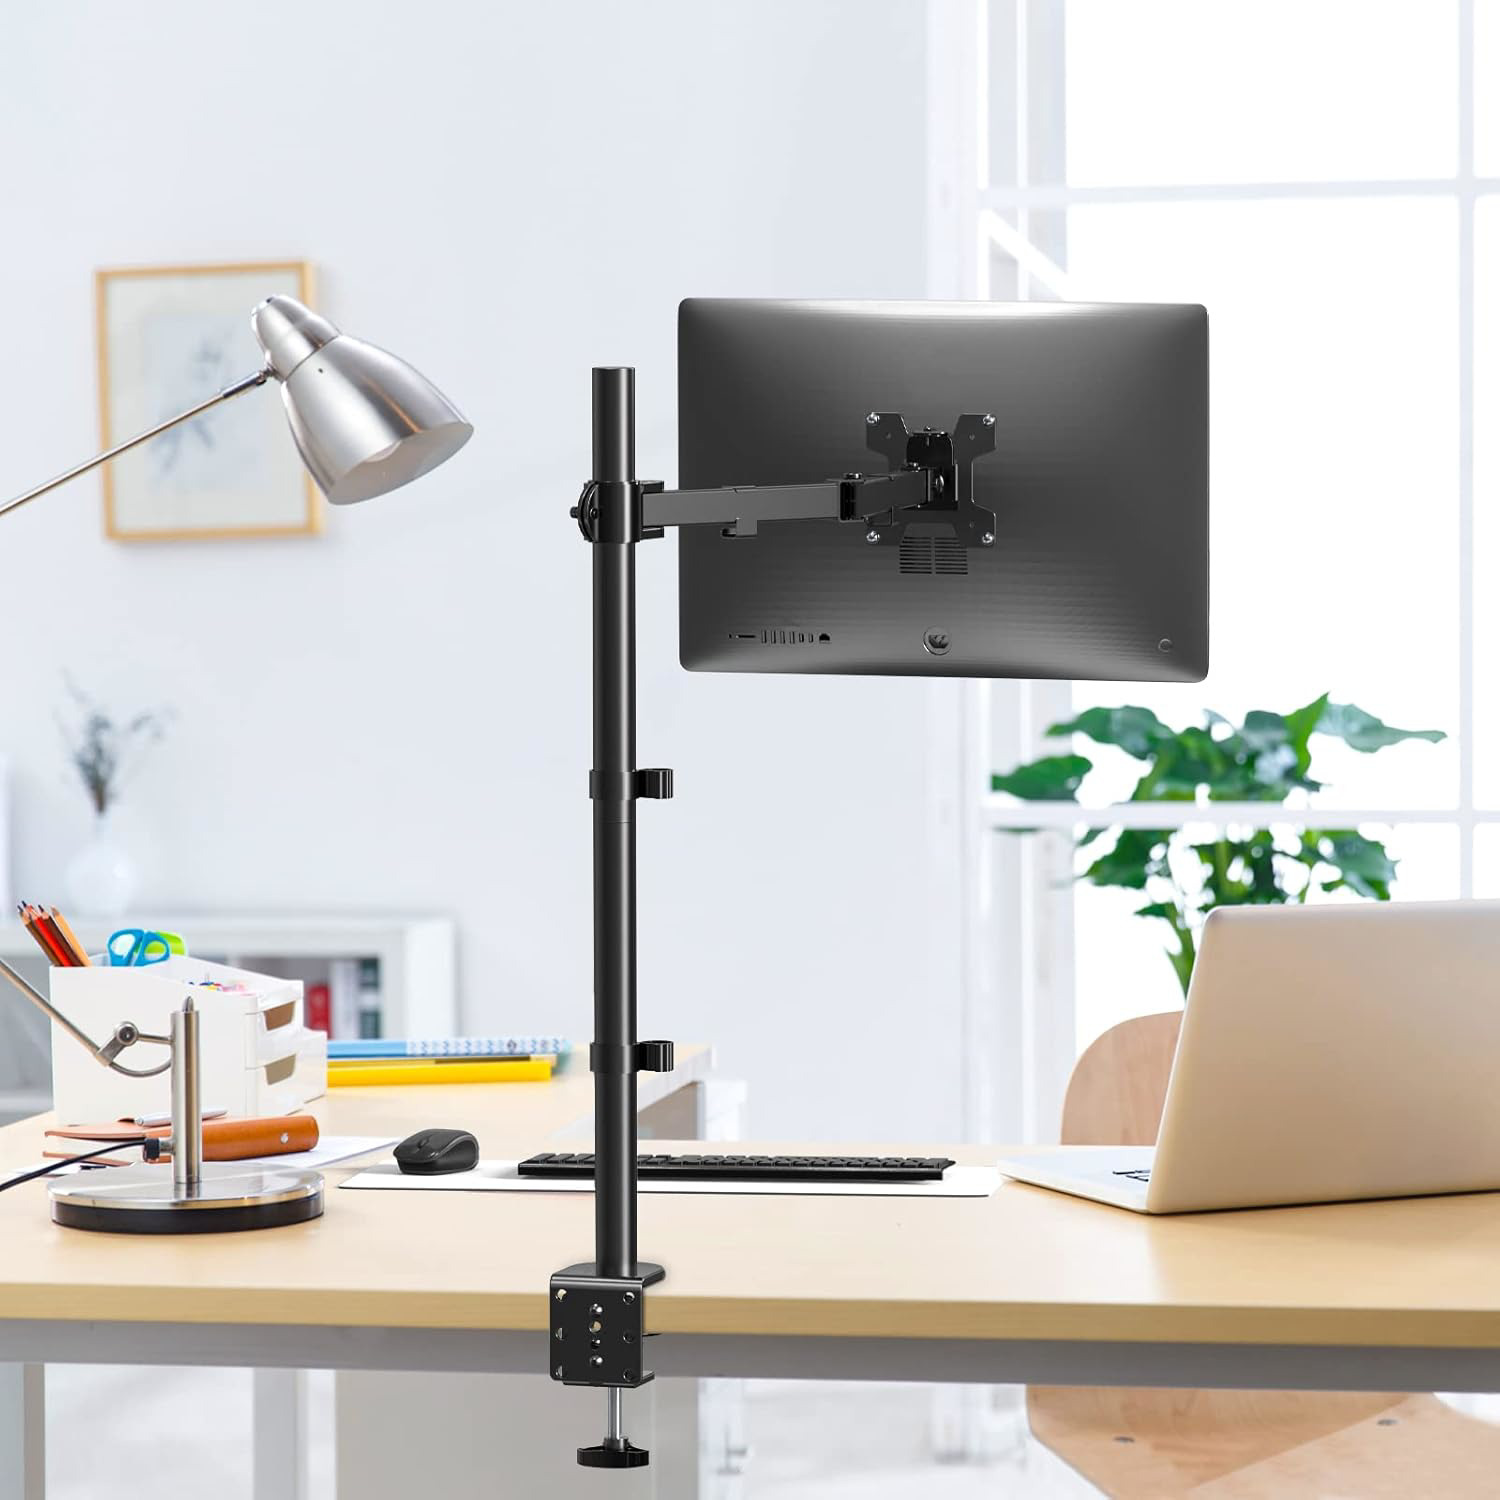 WALI Monitor Arm Mount for Desk, Single Extra Tall Computer Desk Mount, Monitor